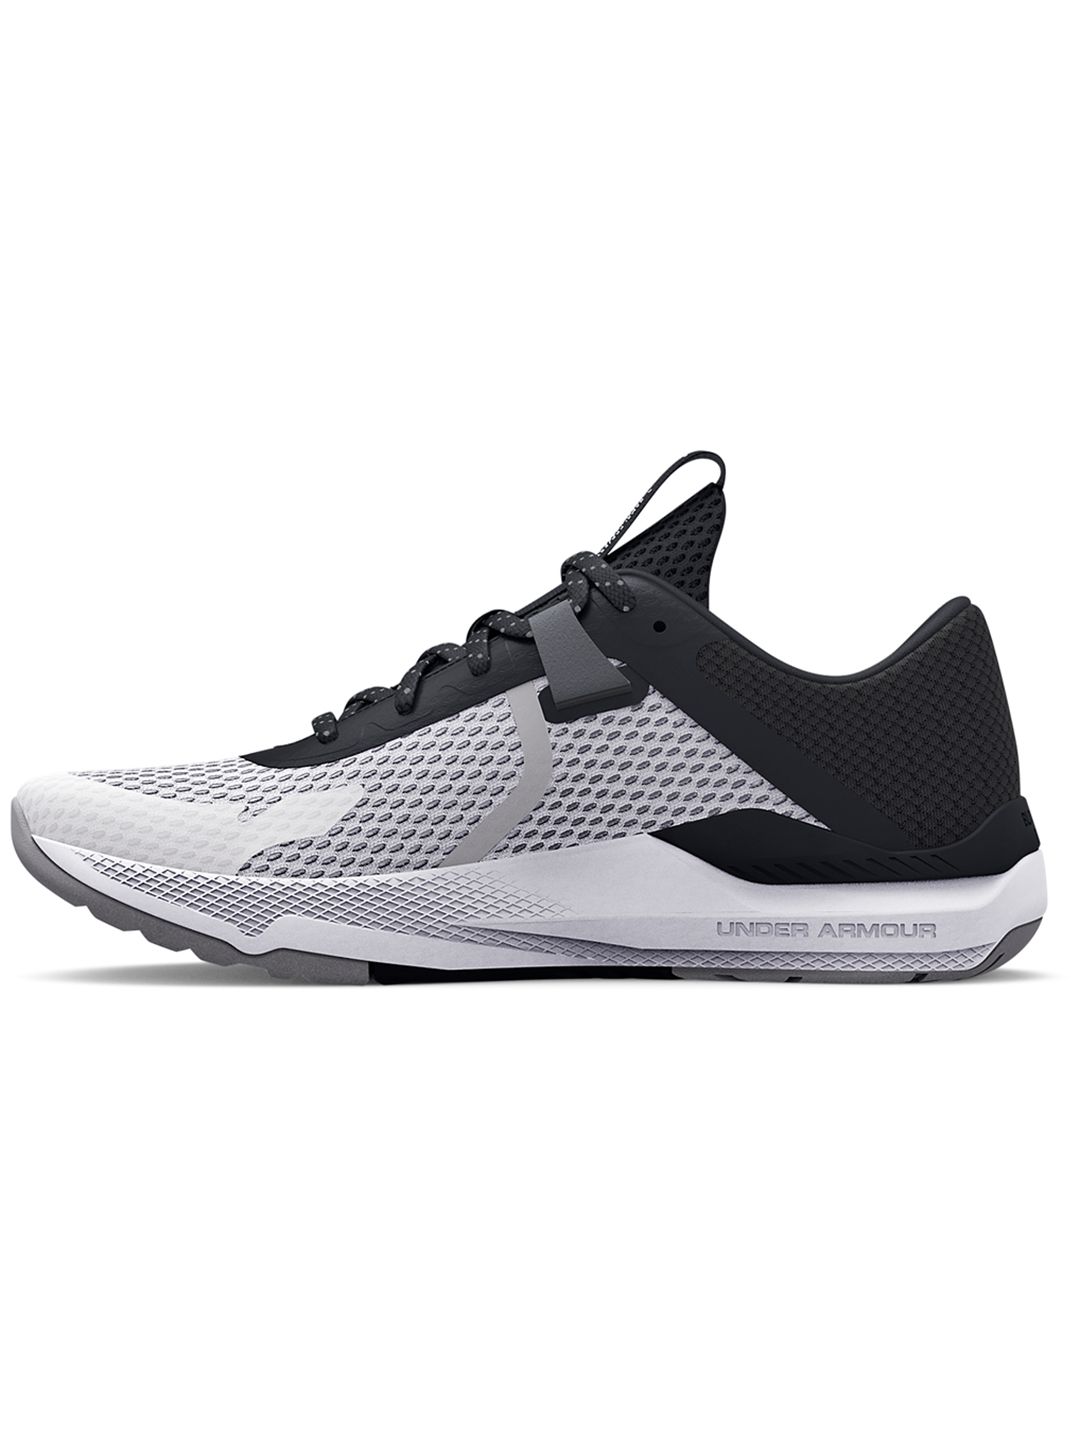 UNDER ARMOUR Unisex White & Black Project Rock Training Shoes Price in India